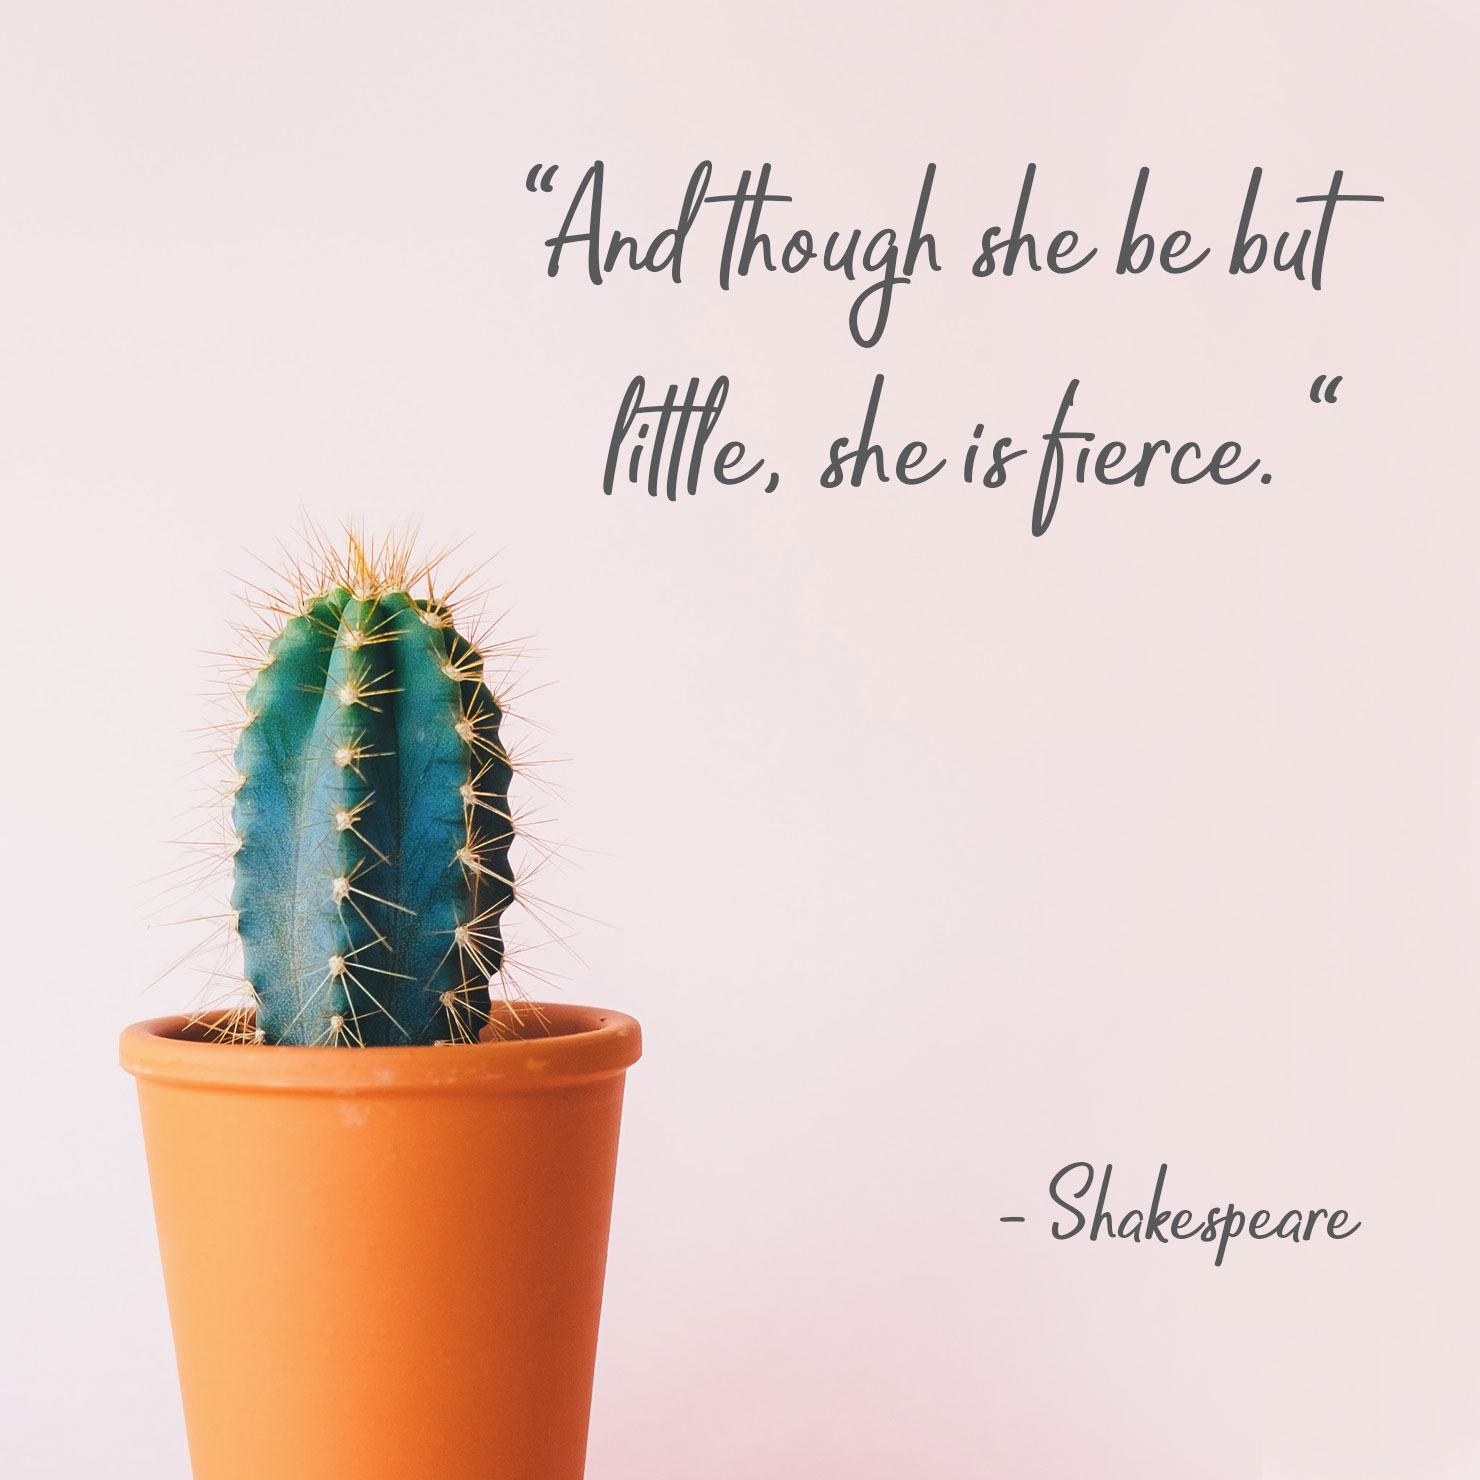 for daughter graduation quote: and though she be but little, she is fierce - Shakespeare